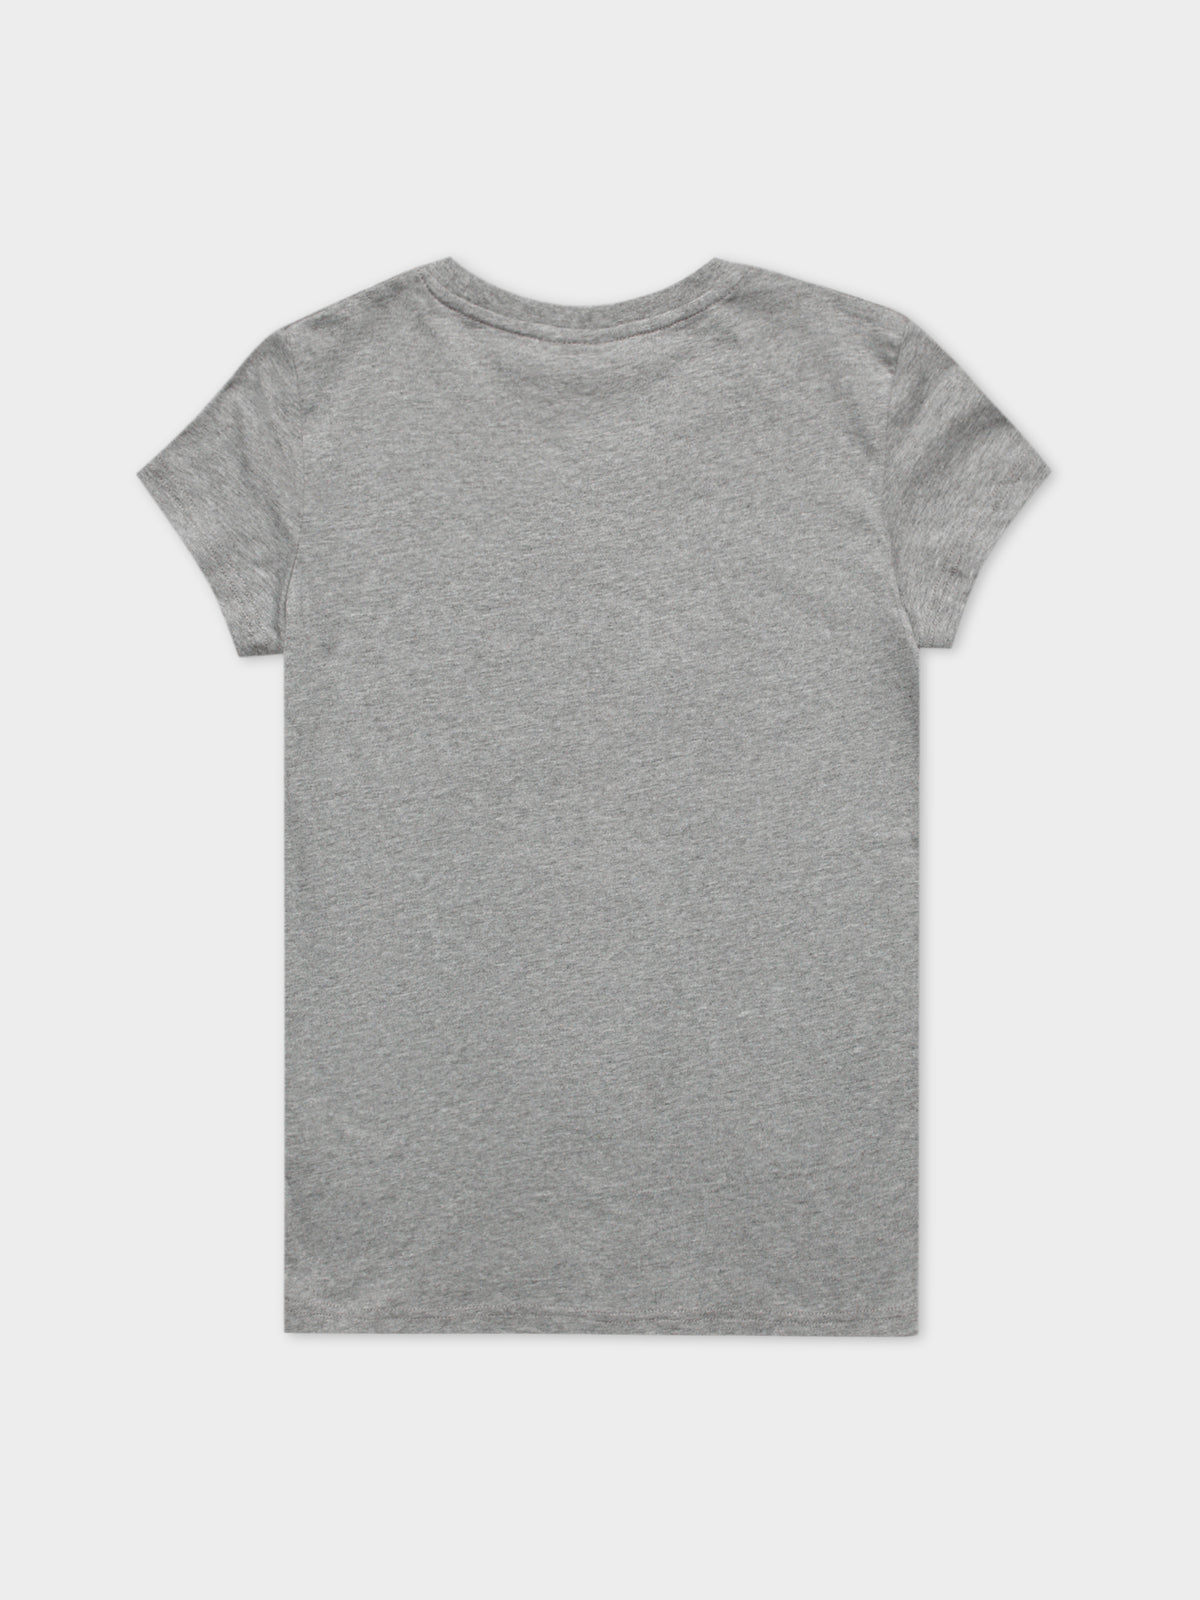 Authentic Westessi T-Shirt in Grey